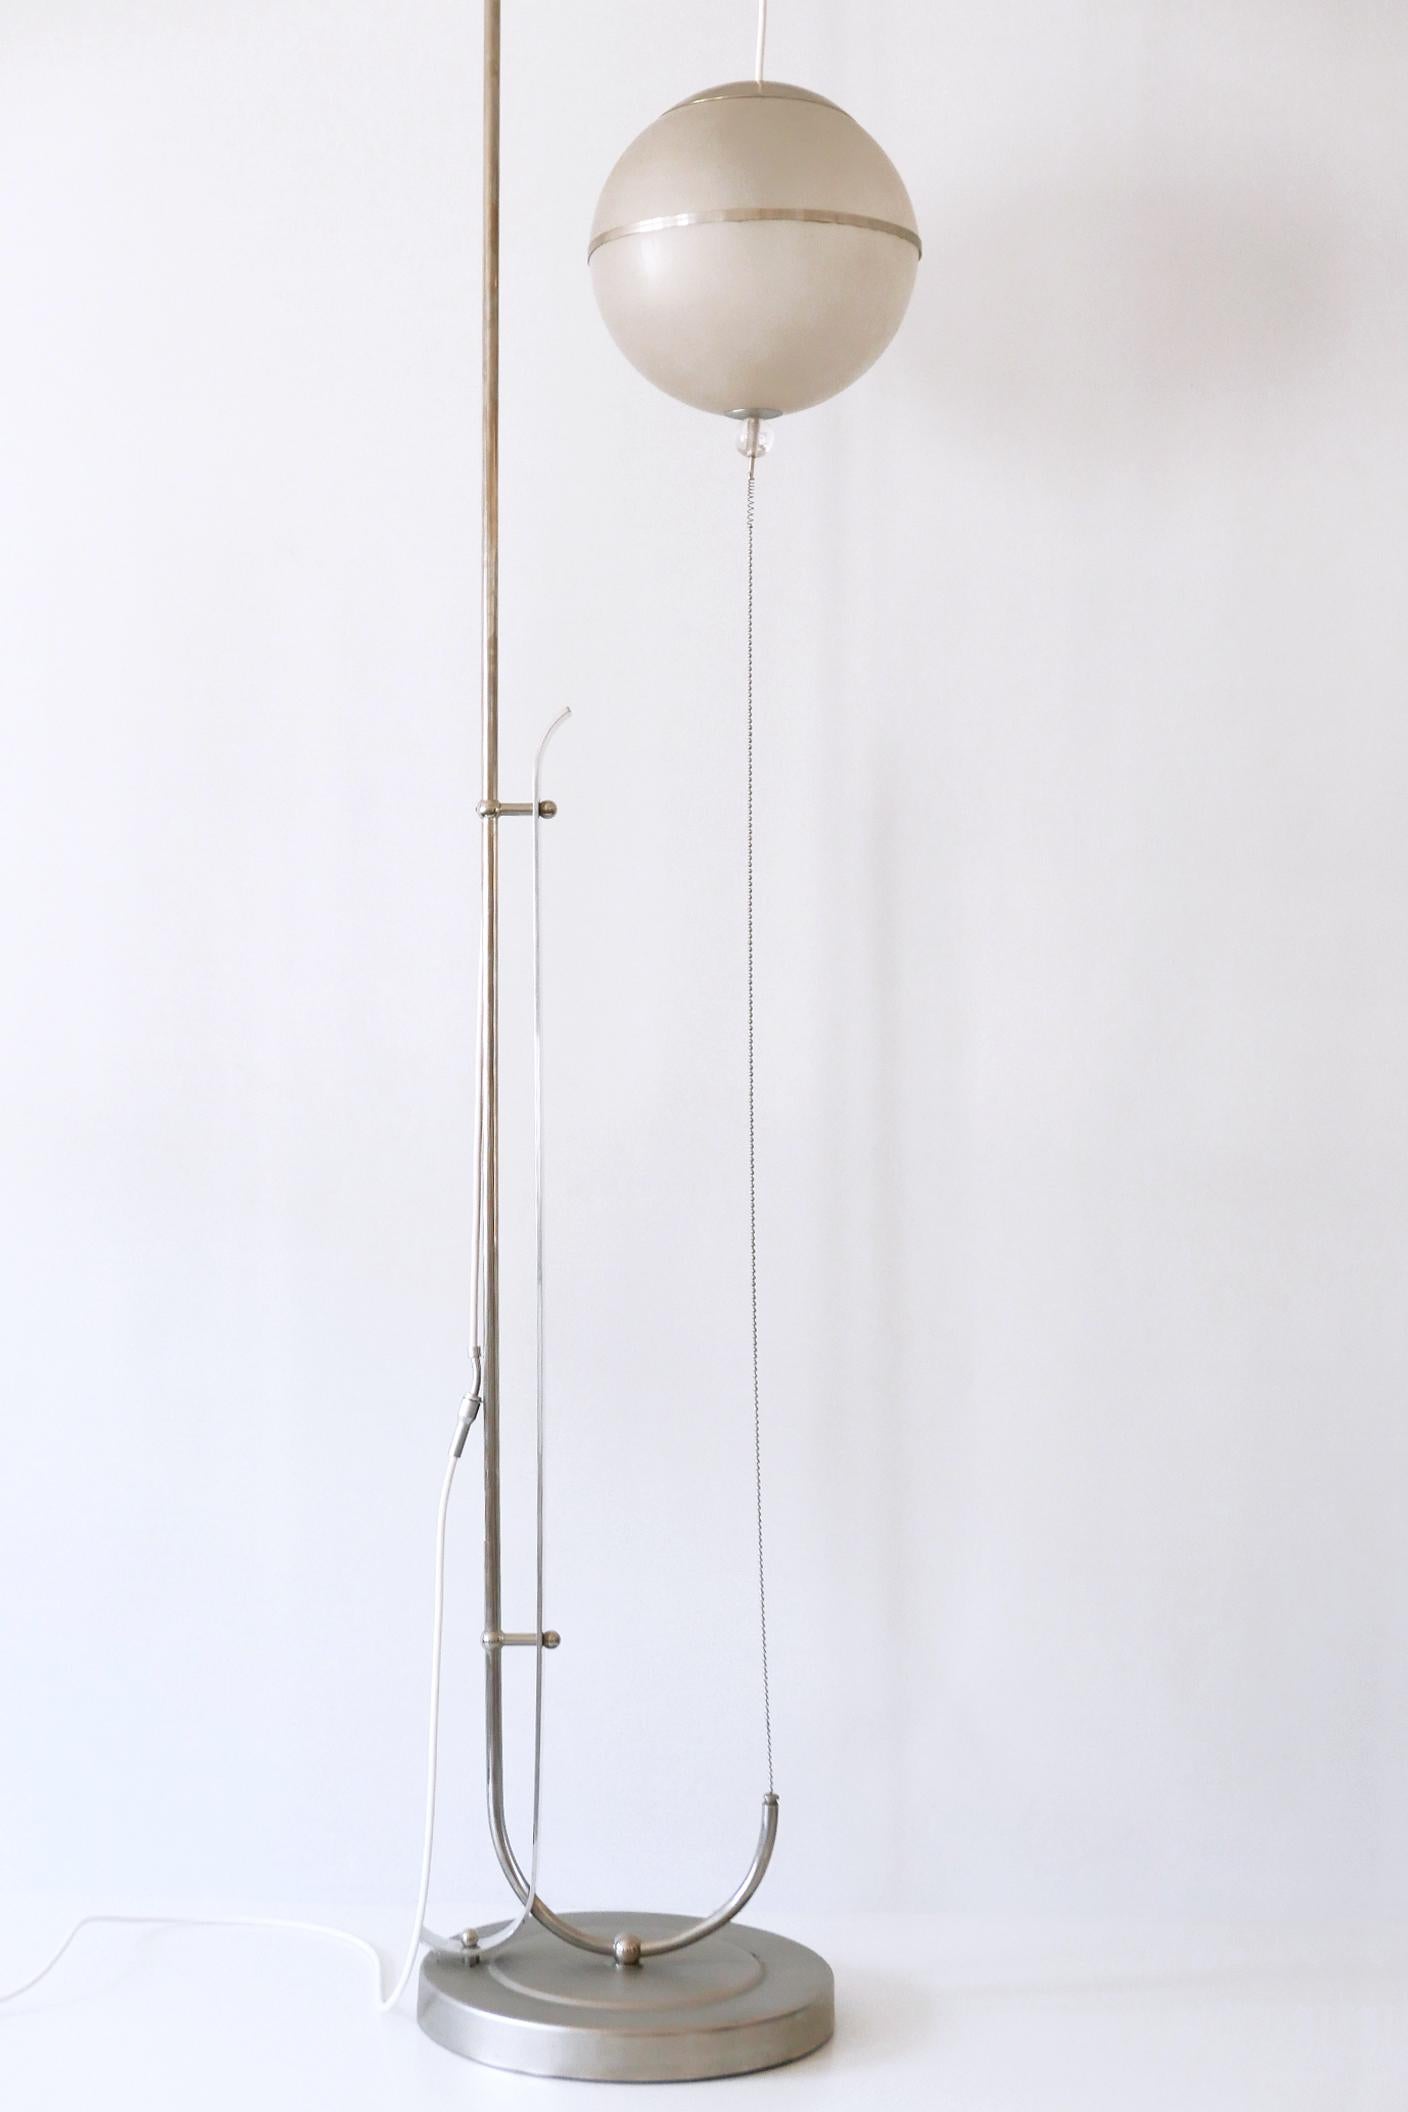 Bauhaus Floor Lamp by Karl Trabert for Schanzenbach & Co 1930s Germany For Sale 5